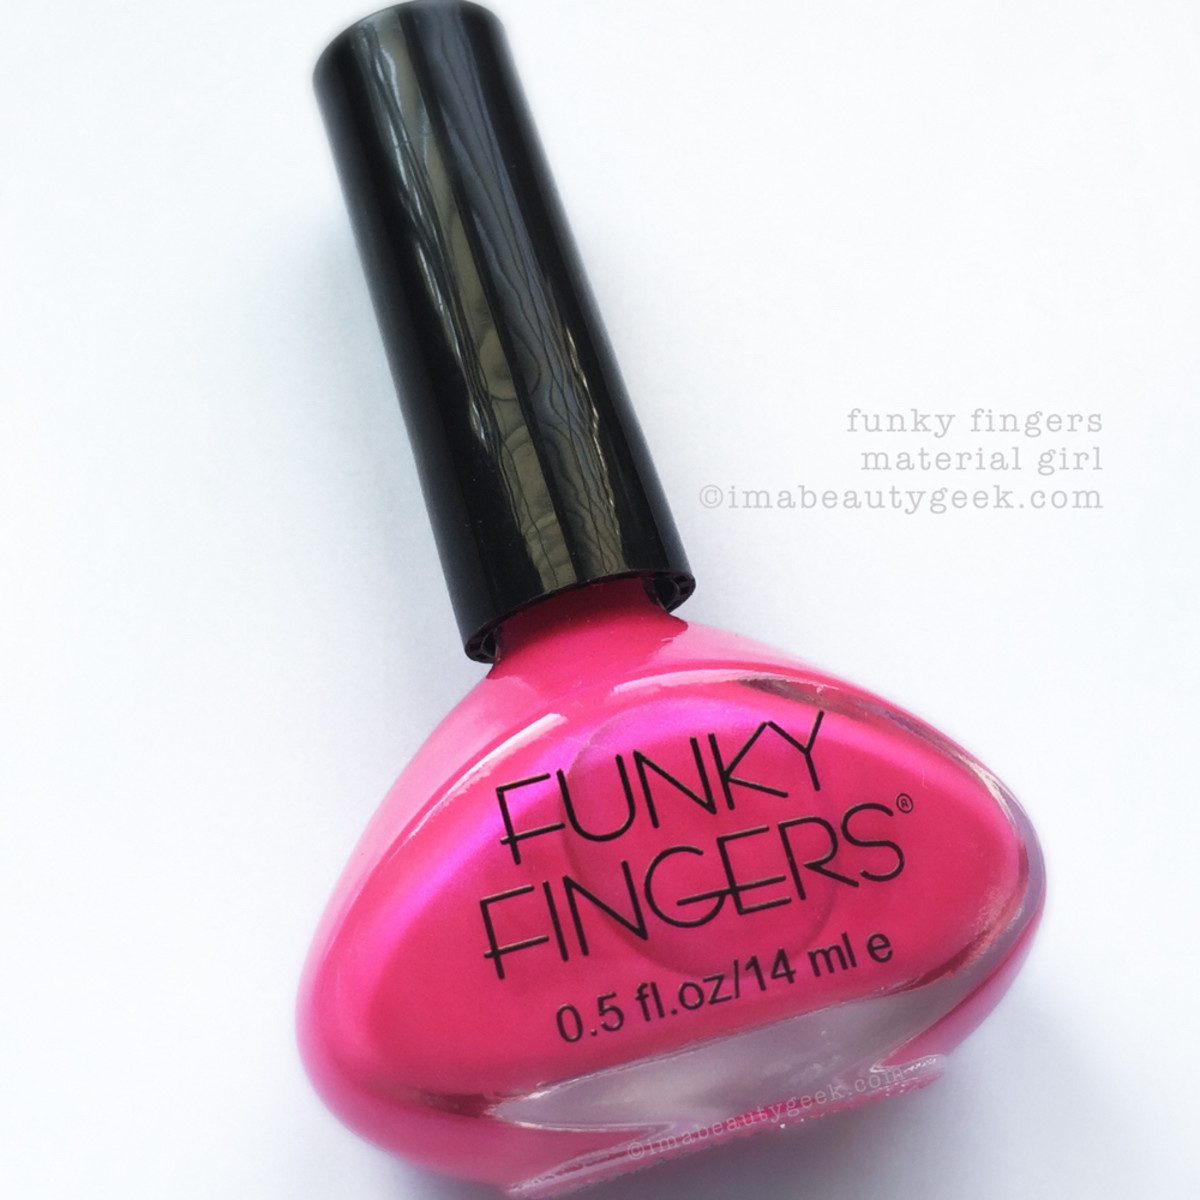 Funky Fingers Material Girl Swatches Beautygeeks Header - Version 2